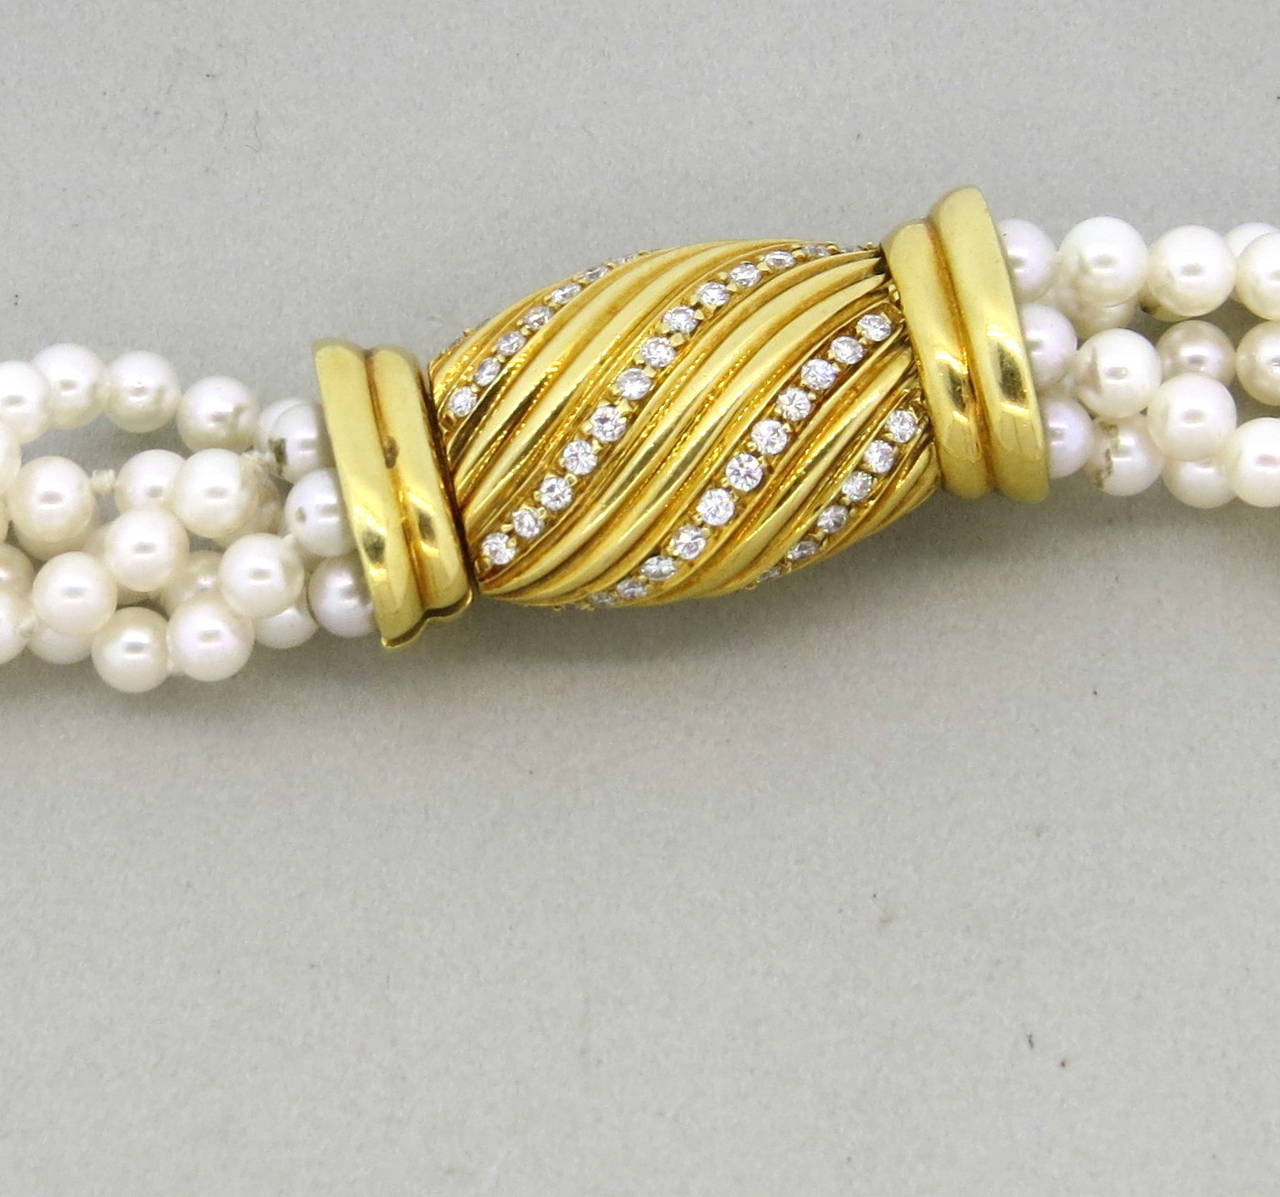 Long necklace, featuring multi strands of 4mm - 4.5mm cultured pearls, decorated with 18k gold and 1.30ctw G/VS diamond clasp. Necklace is 36